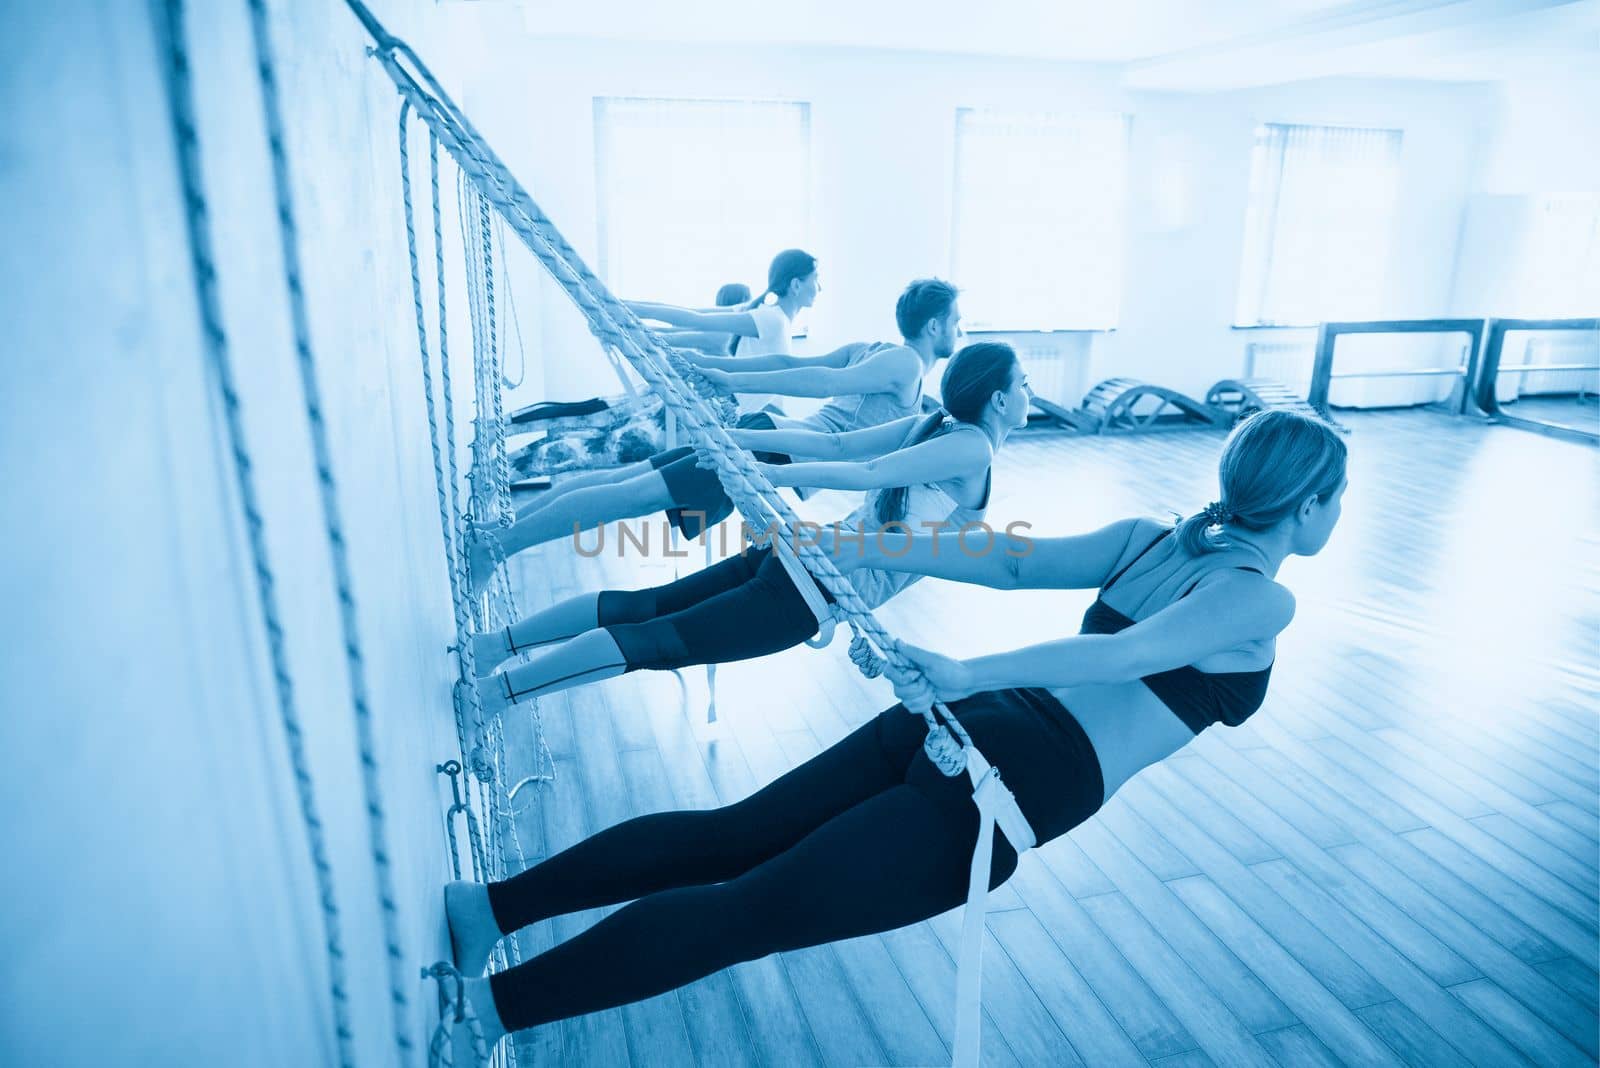 People hanging on ropes practicing yoga stretching in gym. Fit and wellness lifestyle by Mariakray